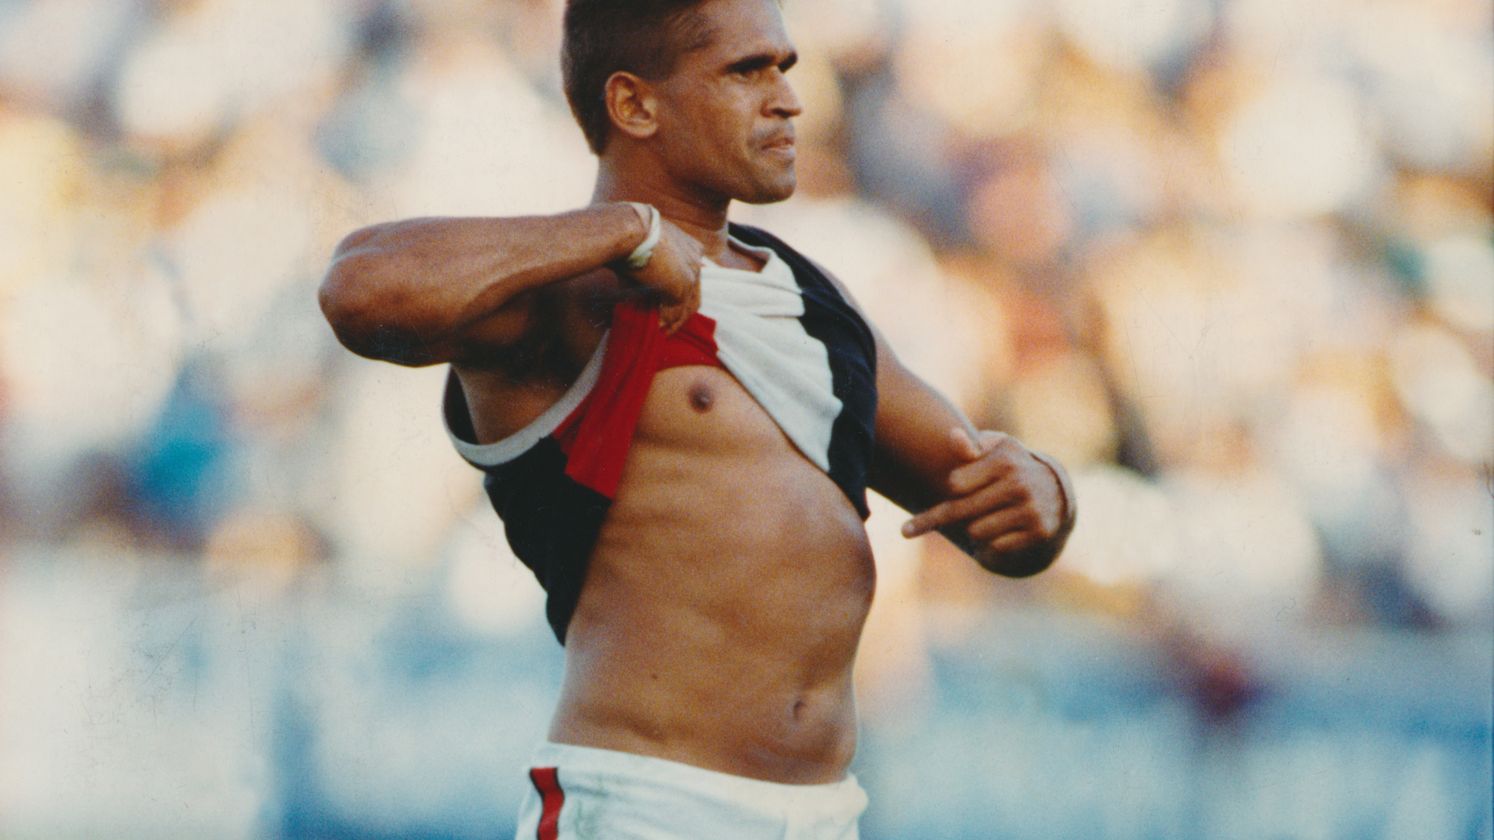 Wayne Ludbey&#x27;s iconic photo of Nicky Winmar after St Kilda defeated Collingwood in 1993. Thirty years on, Collingwood have formally apologised.